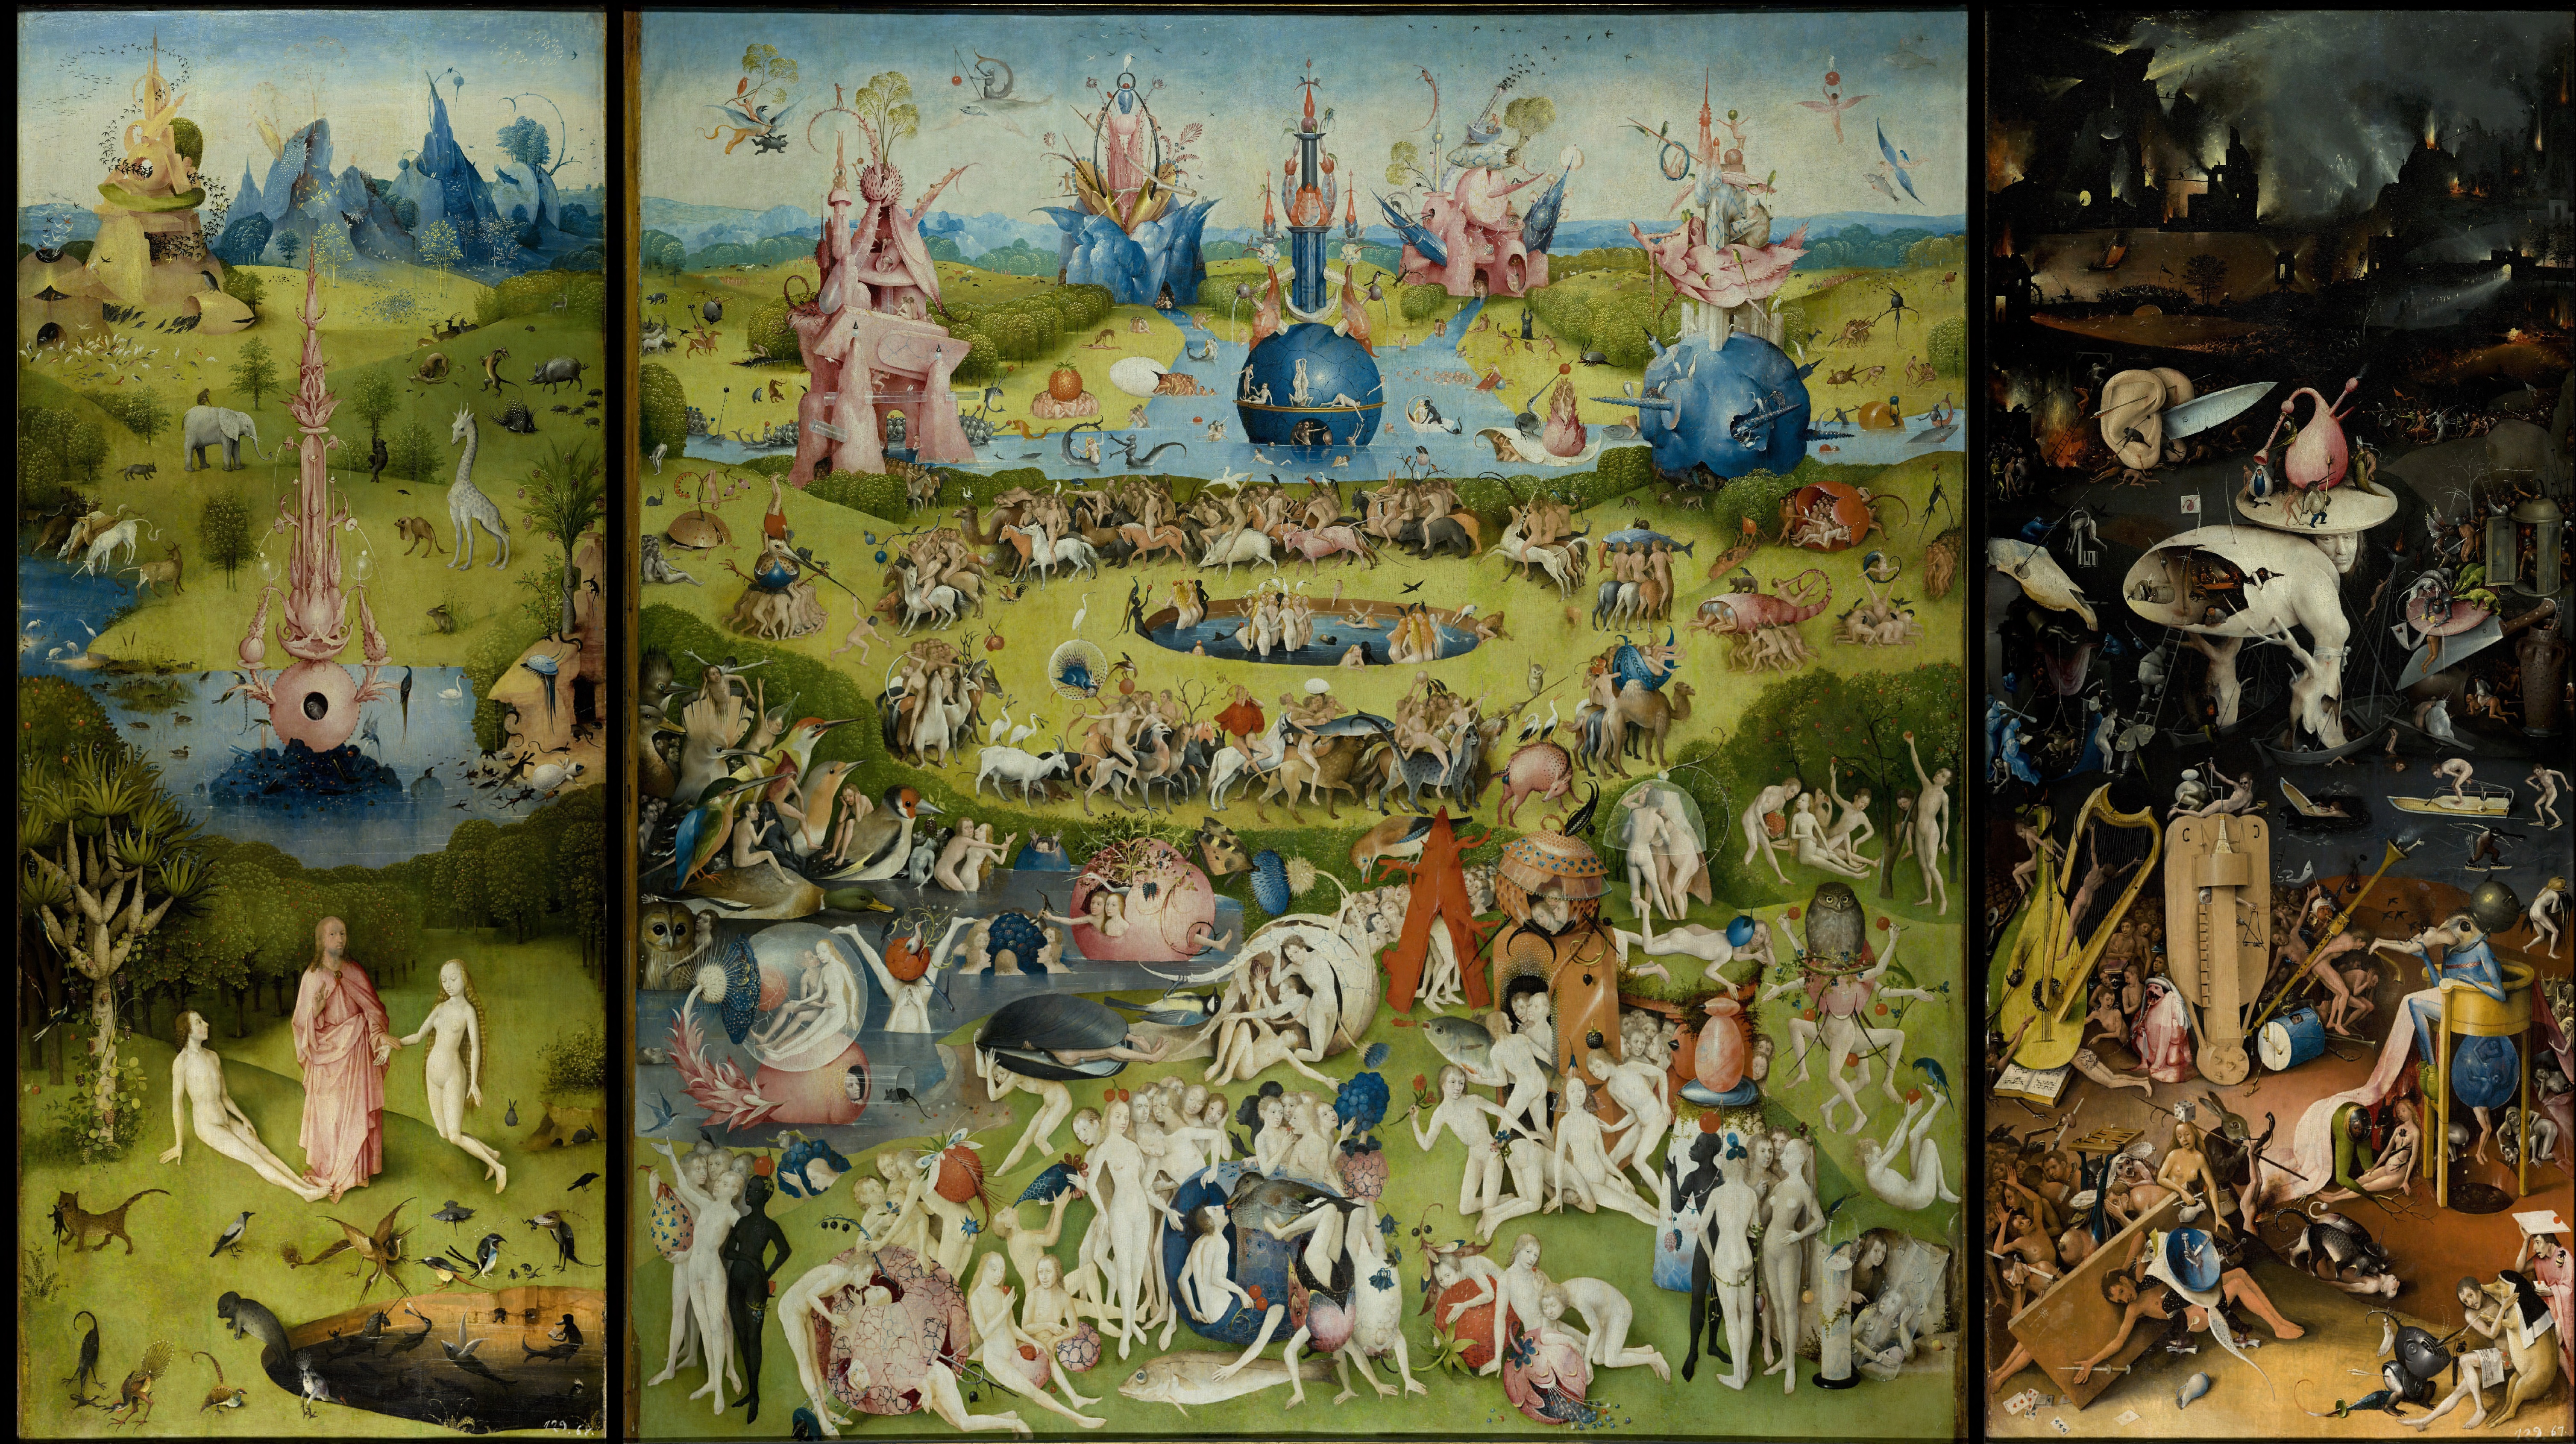 Hieronymus Bosch, Classic art, Painting, The Garden of Earthly Delights Wallpaper